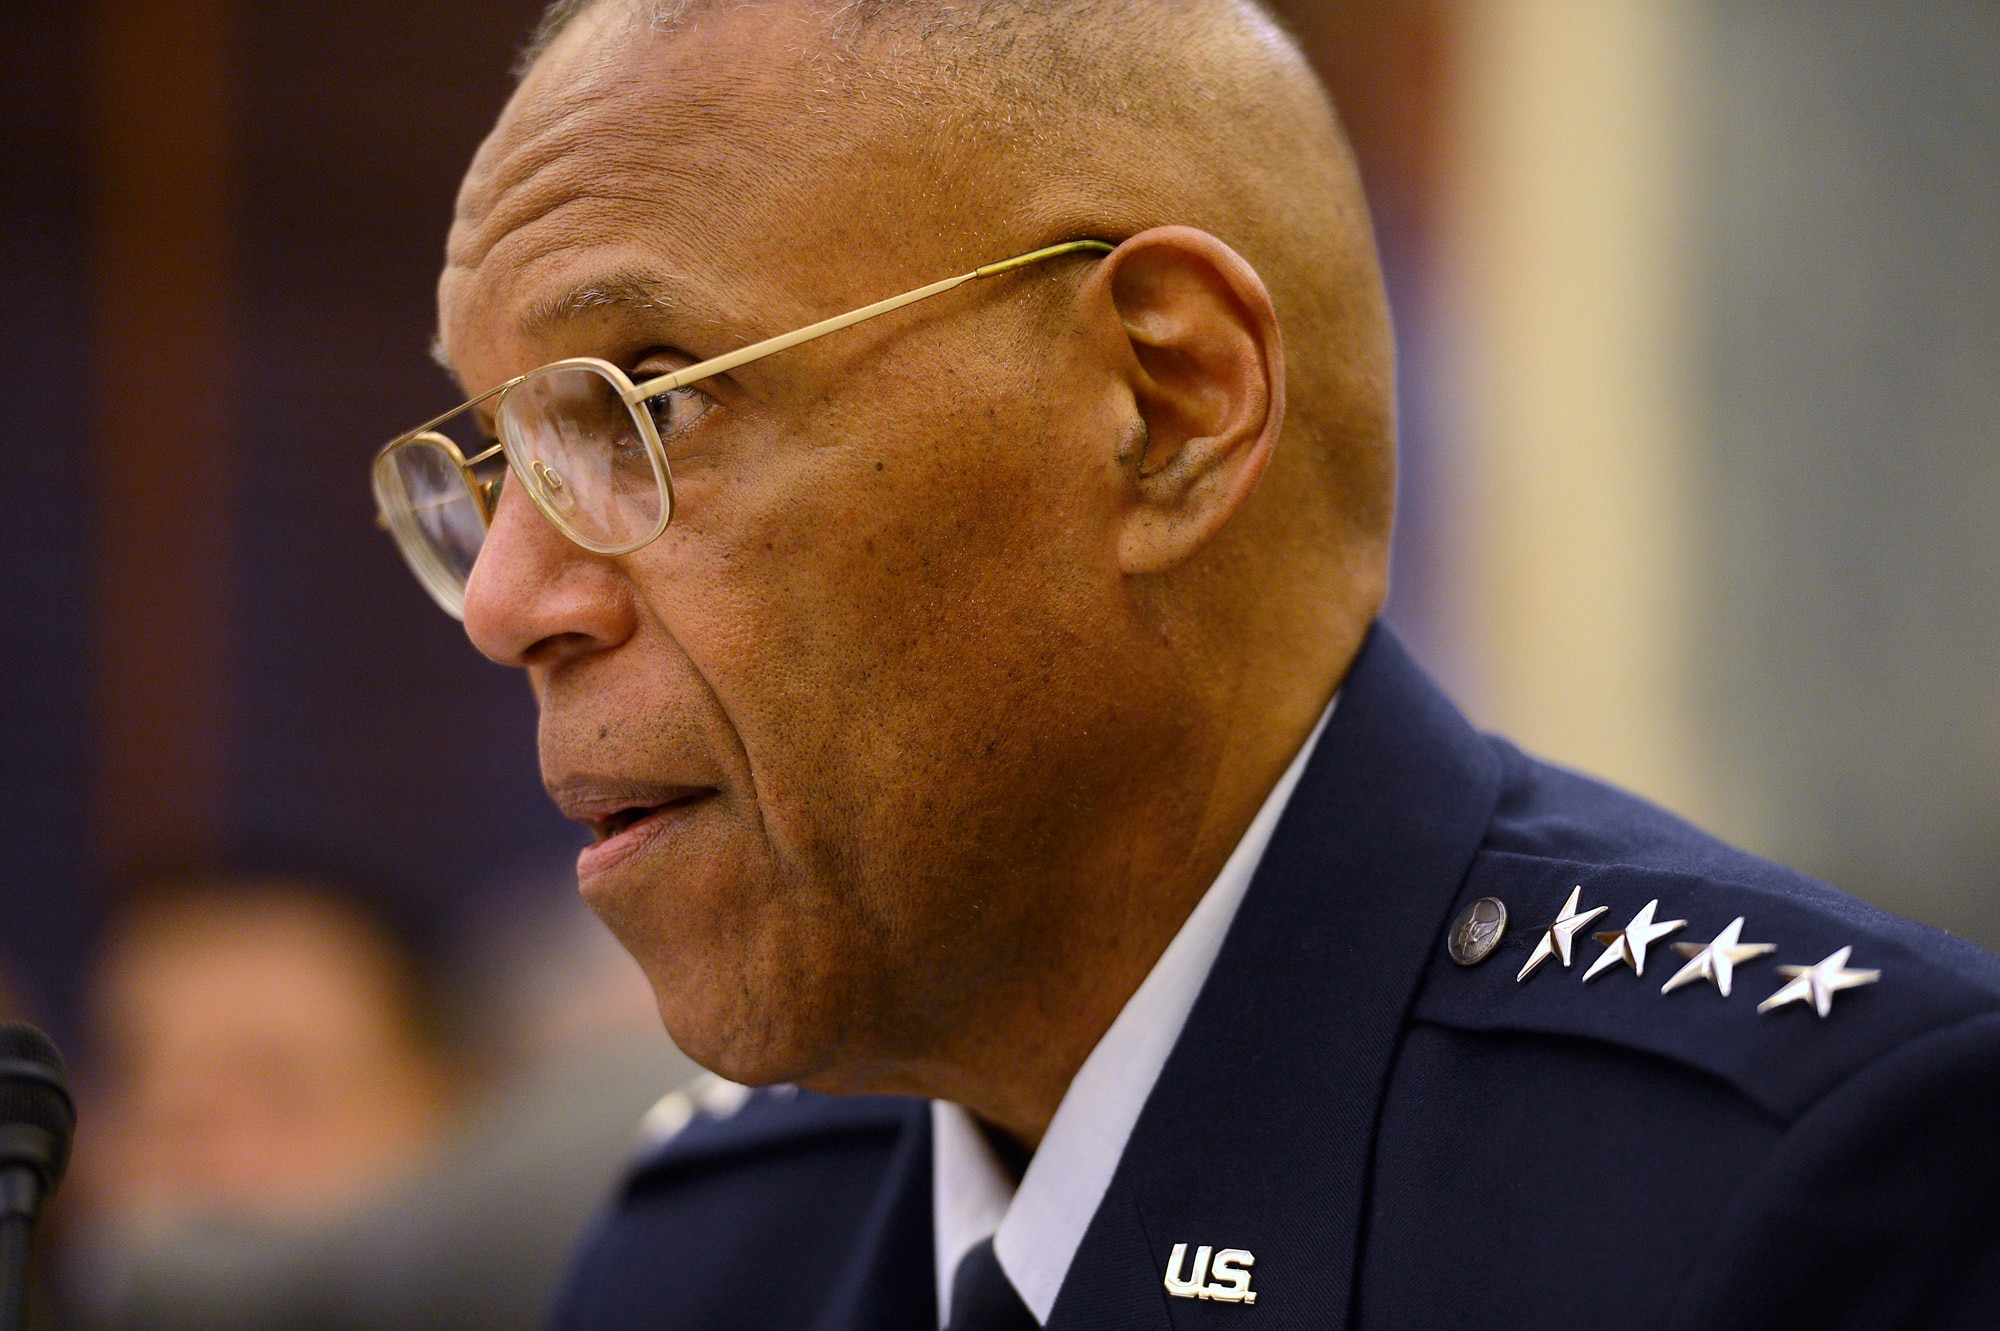 Air Force Vice Chief of Staff Gen. Larry O. Spencer testifies during the Senate Armed Services Committee's hearing on current military readiness in Washington, D.C., March 25, 2015. Spencer stressed that a ready, strong and agile Air Force is a critical component of the best, most credible military in the world. (U.S. Air Force photo/Scott M. Ash)